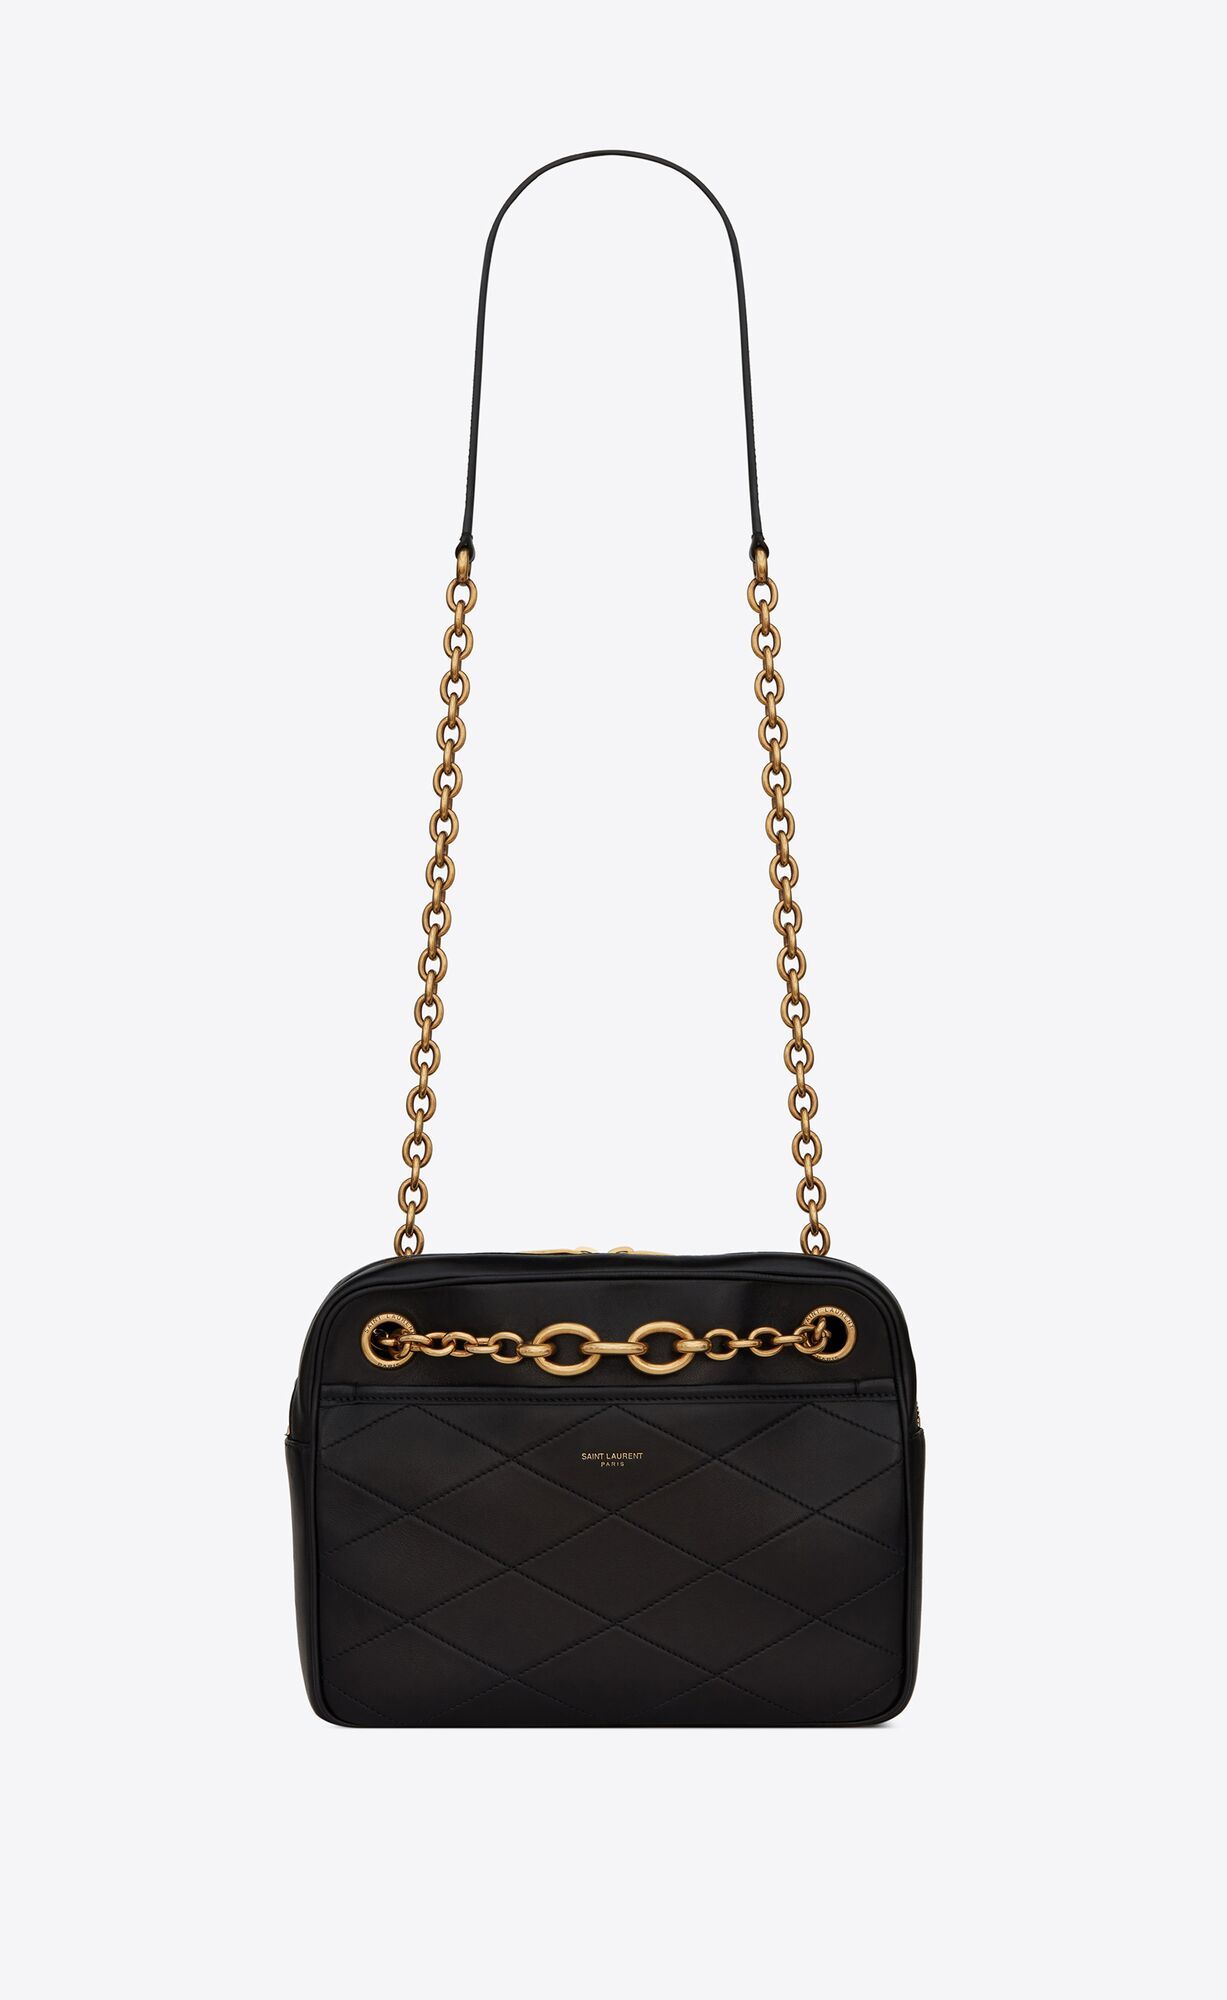 LE MAILLON SMALL CHAIN BAG IN QUILTED LAMBSKIN | Saint Laurent __locale_country__ | YSL.com | Saint Laurent Inc. (Global)